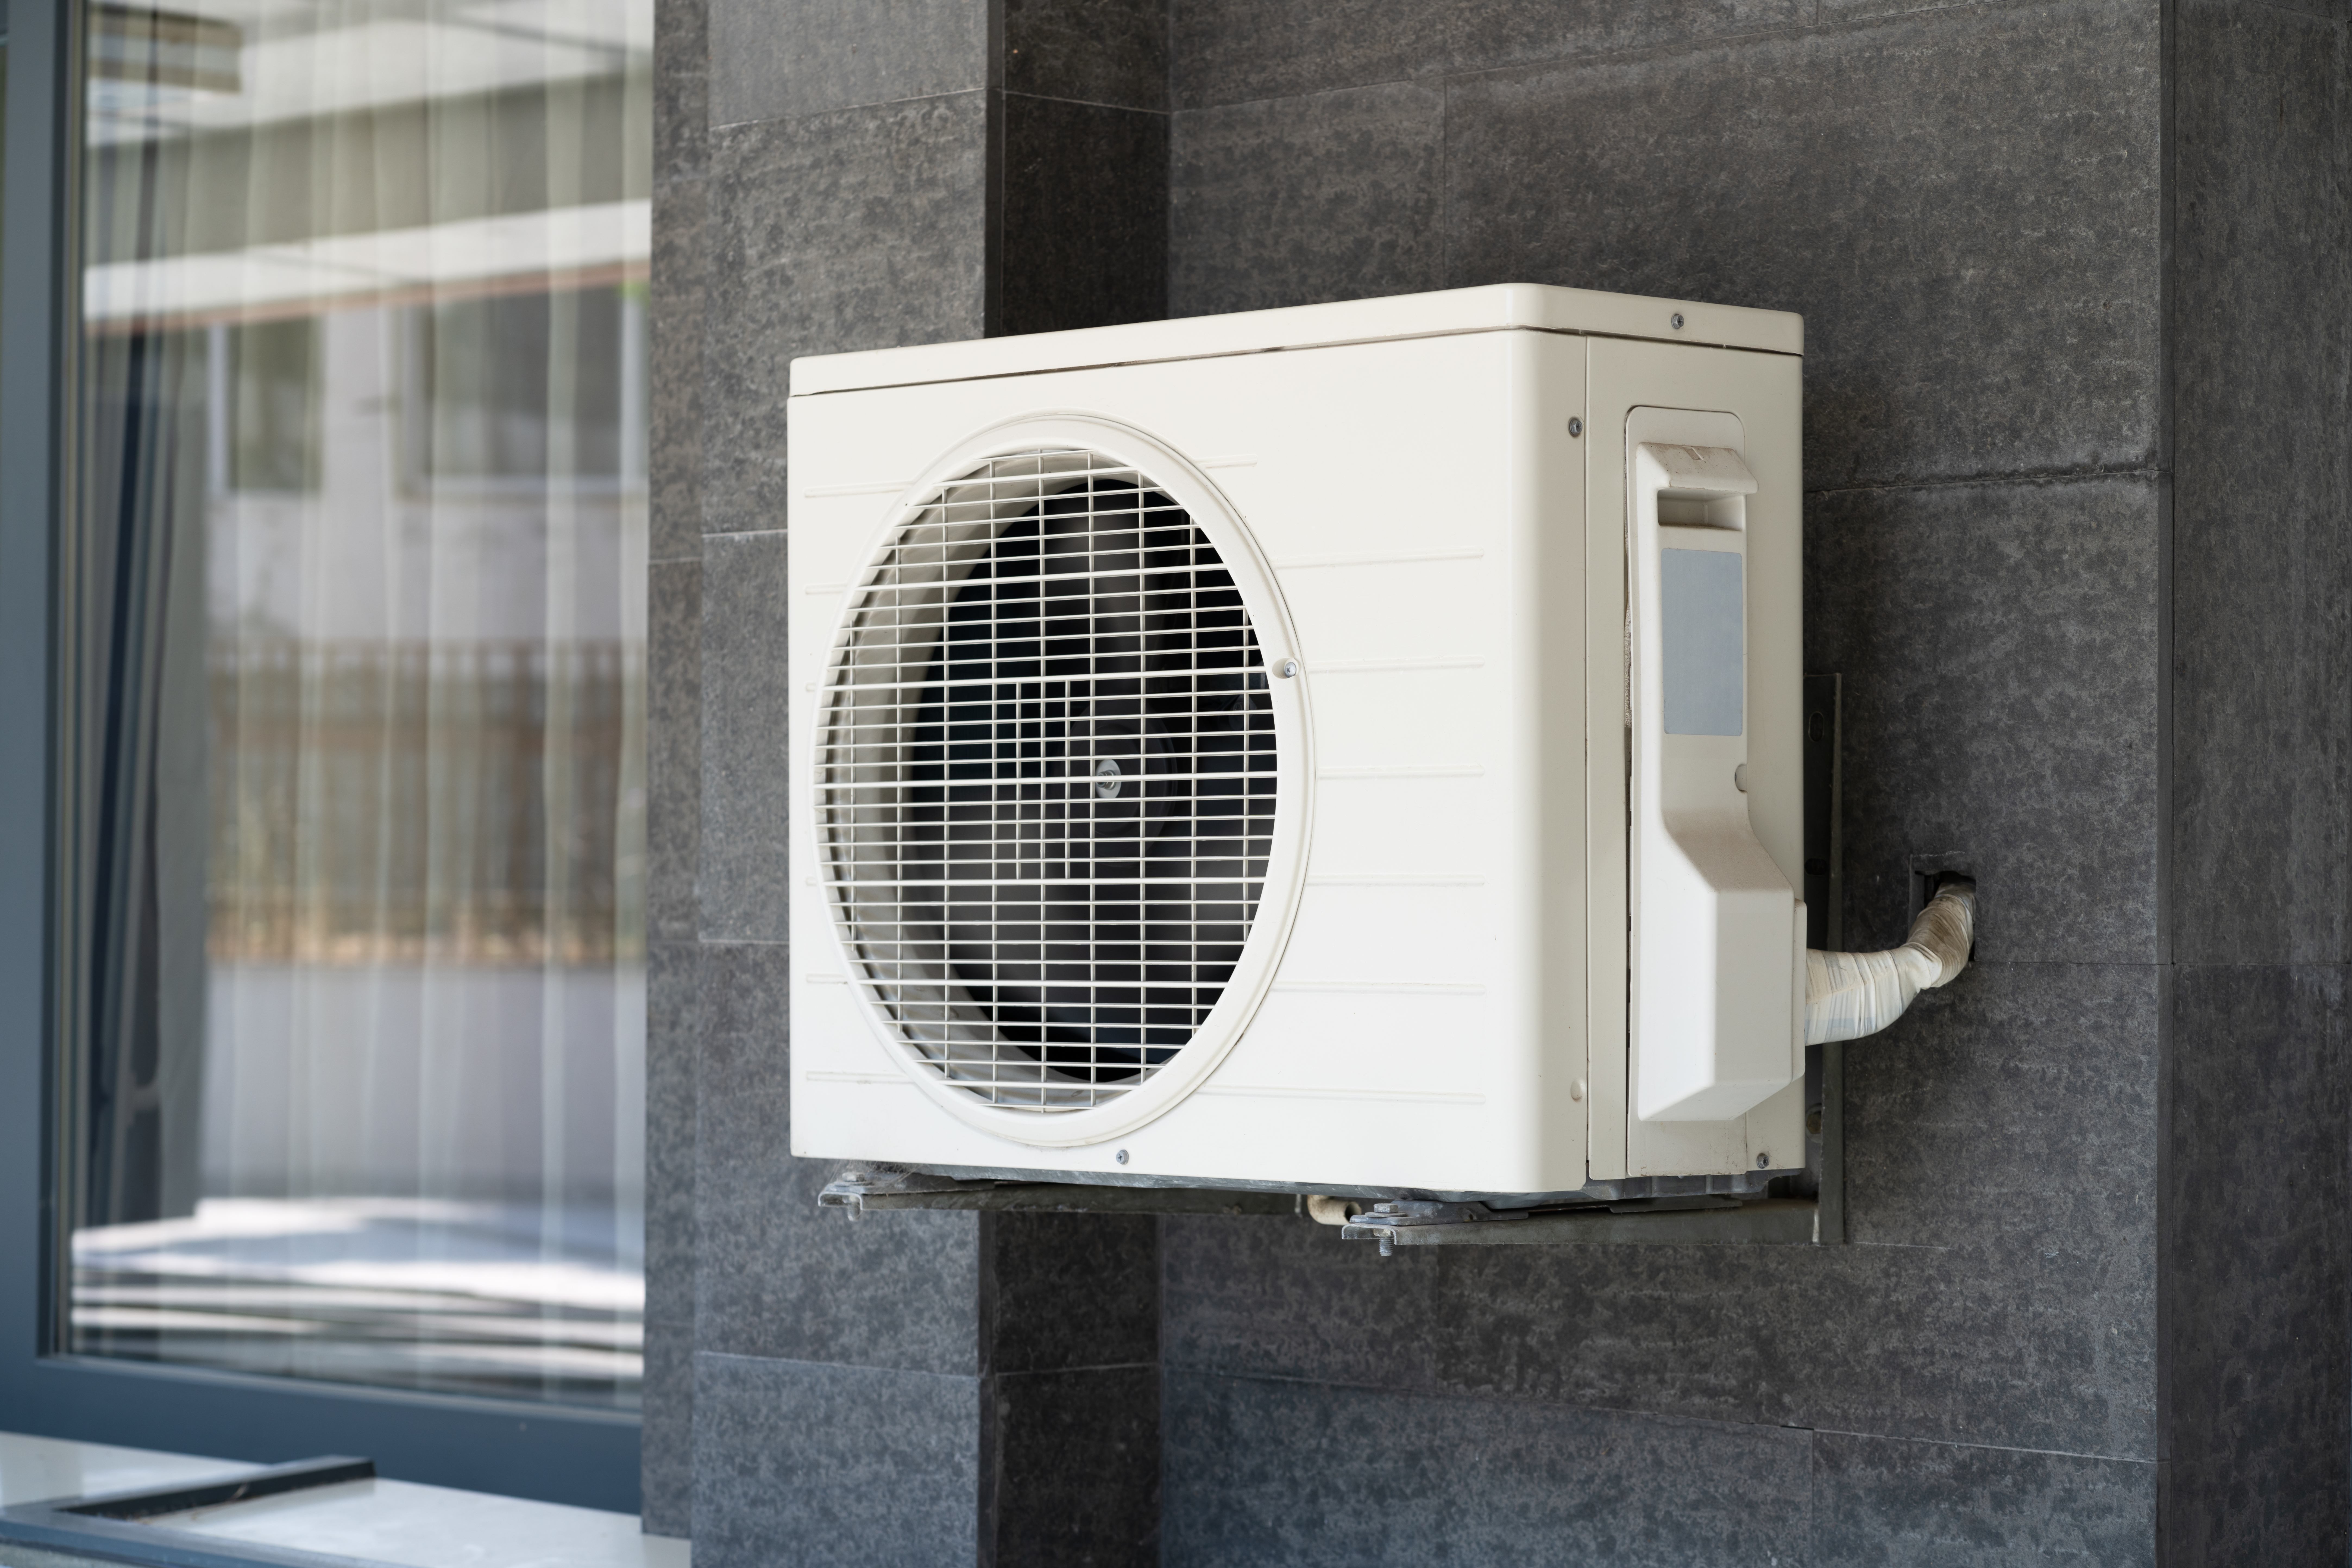 How to Choose the Right Size Heat Pump for Your Home